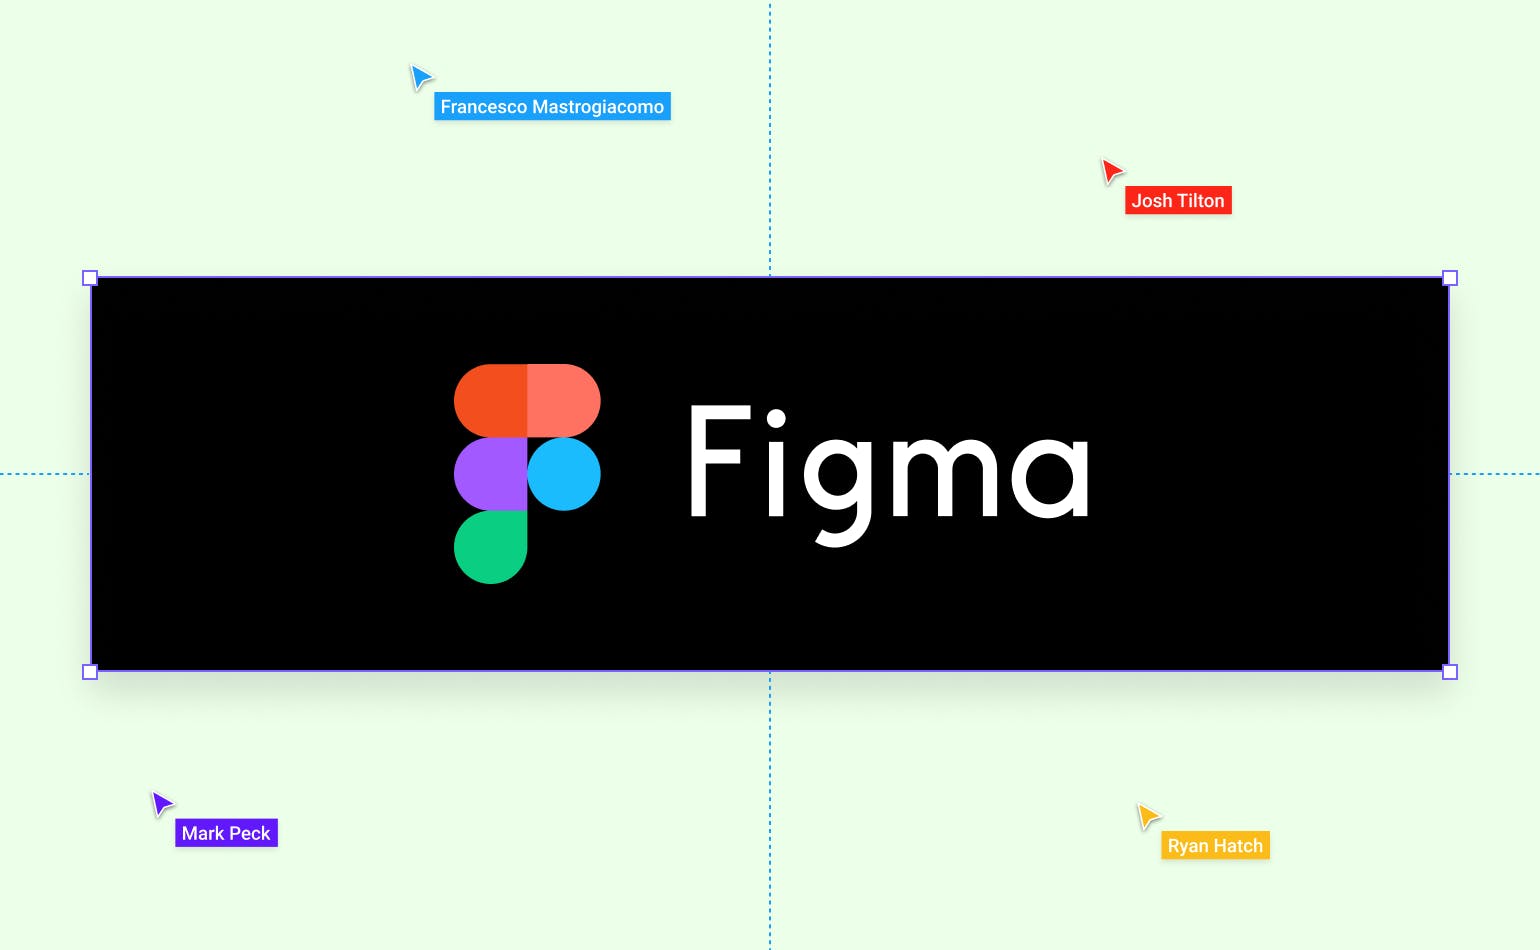 Figma image with four cursors indicating collaboration